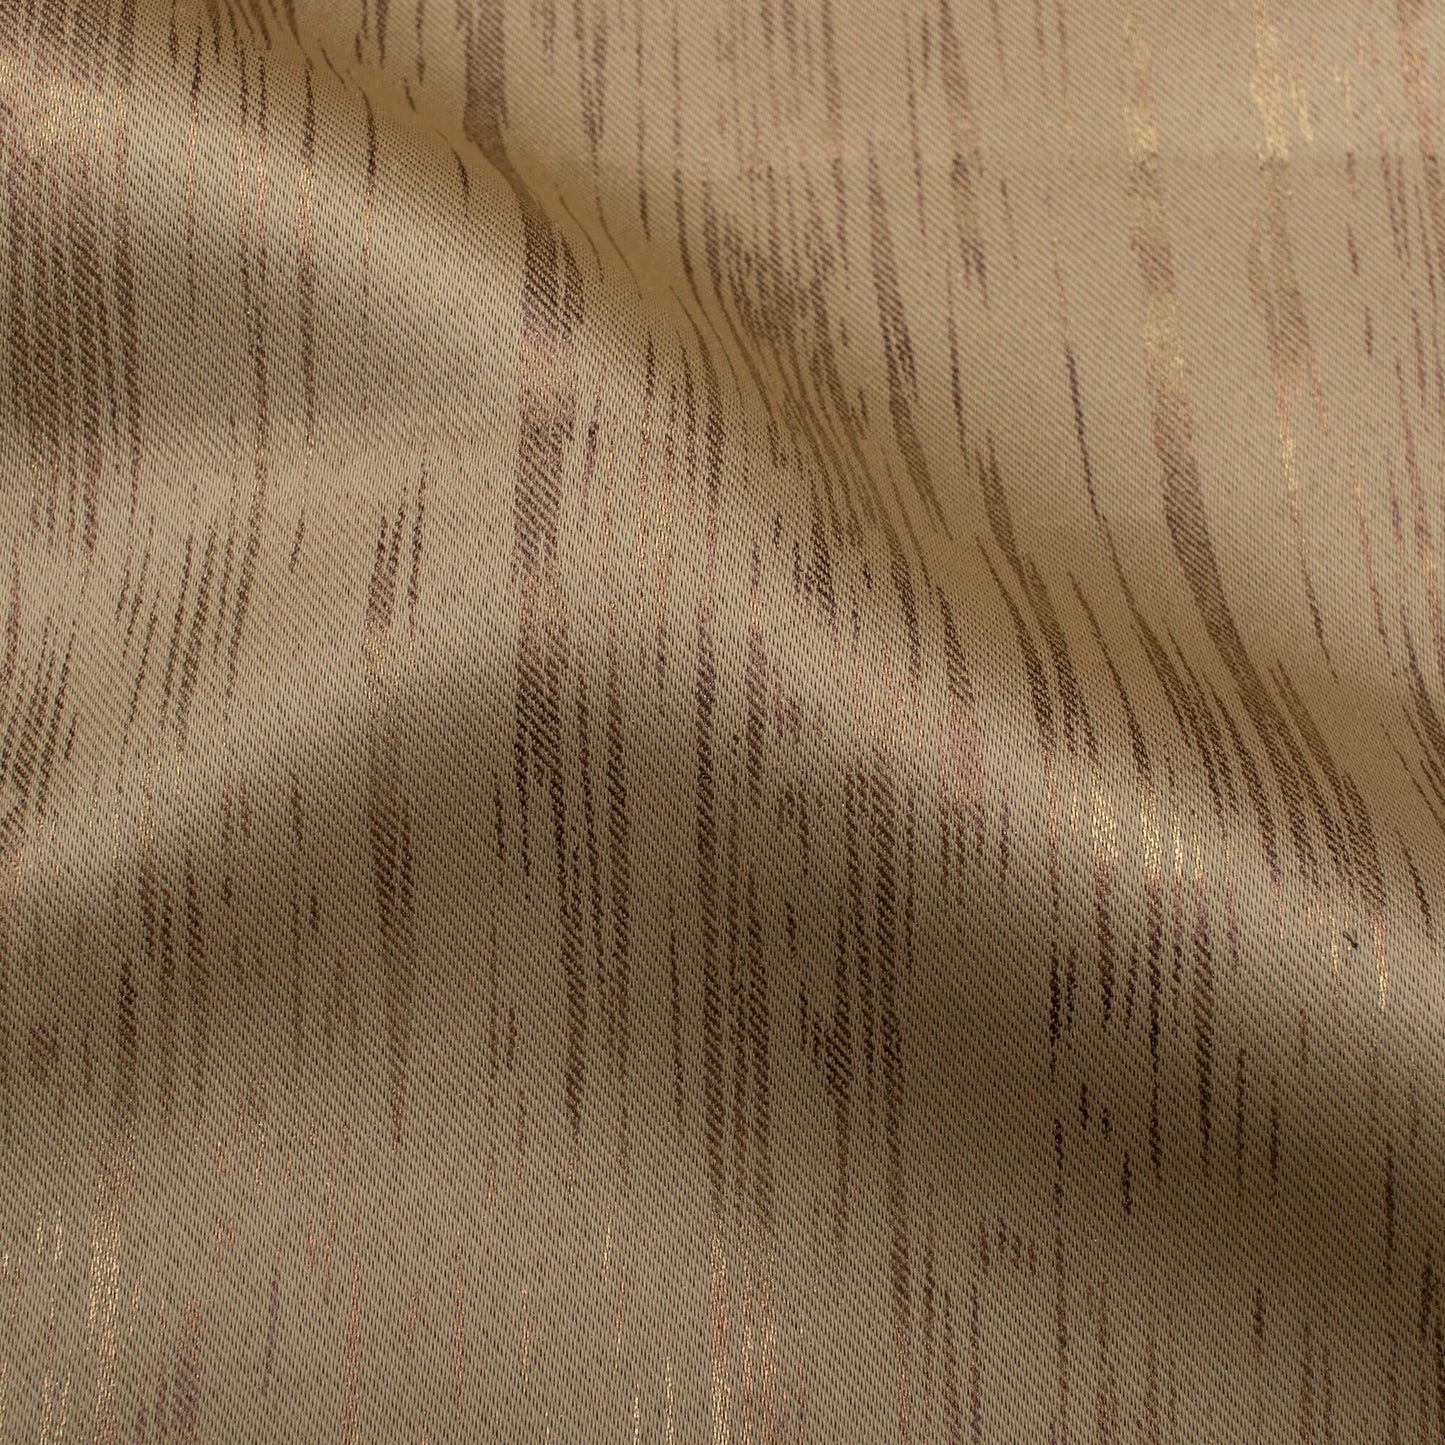 Camel Brown Textured Golden Foil Premium Curtain Fabric (Width 54 Inches)